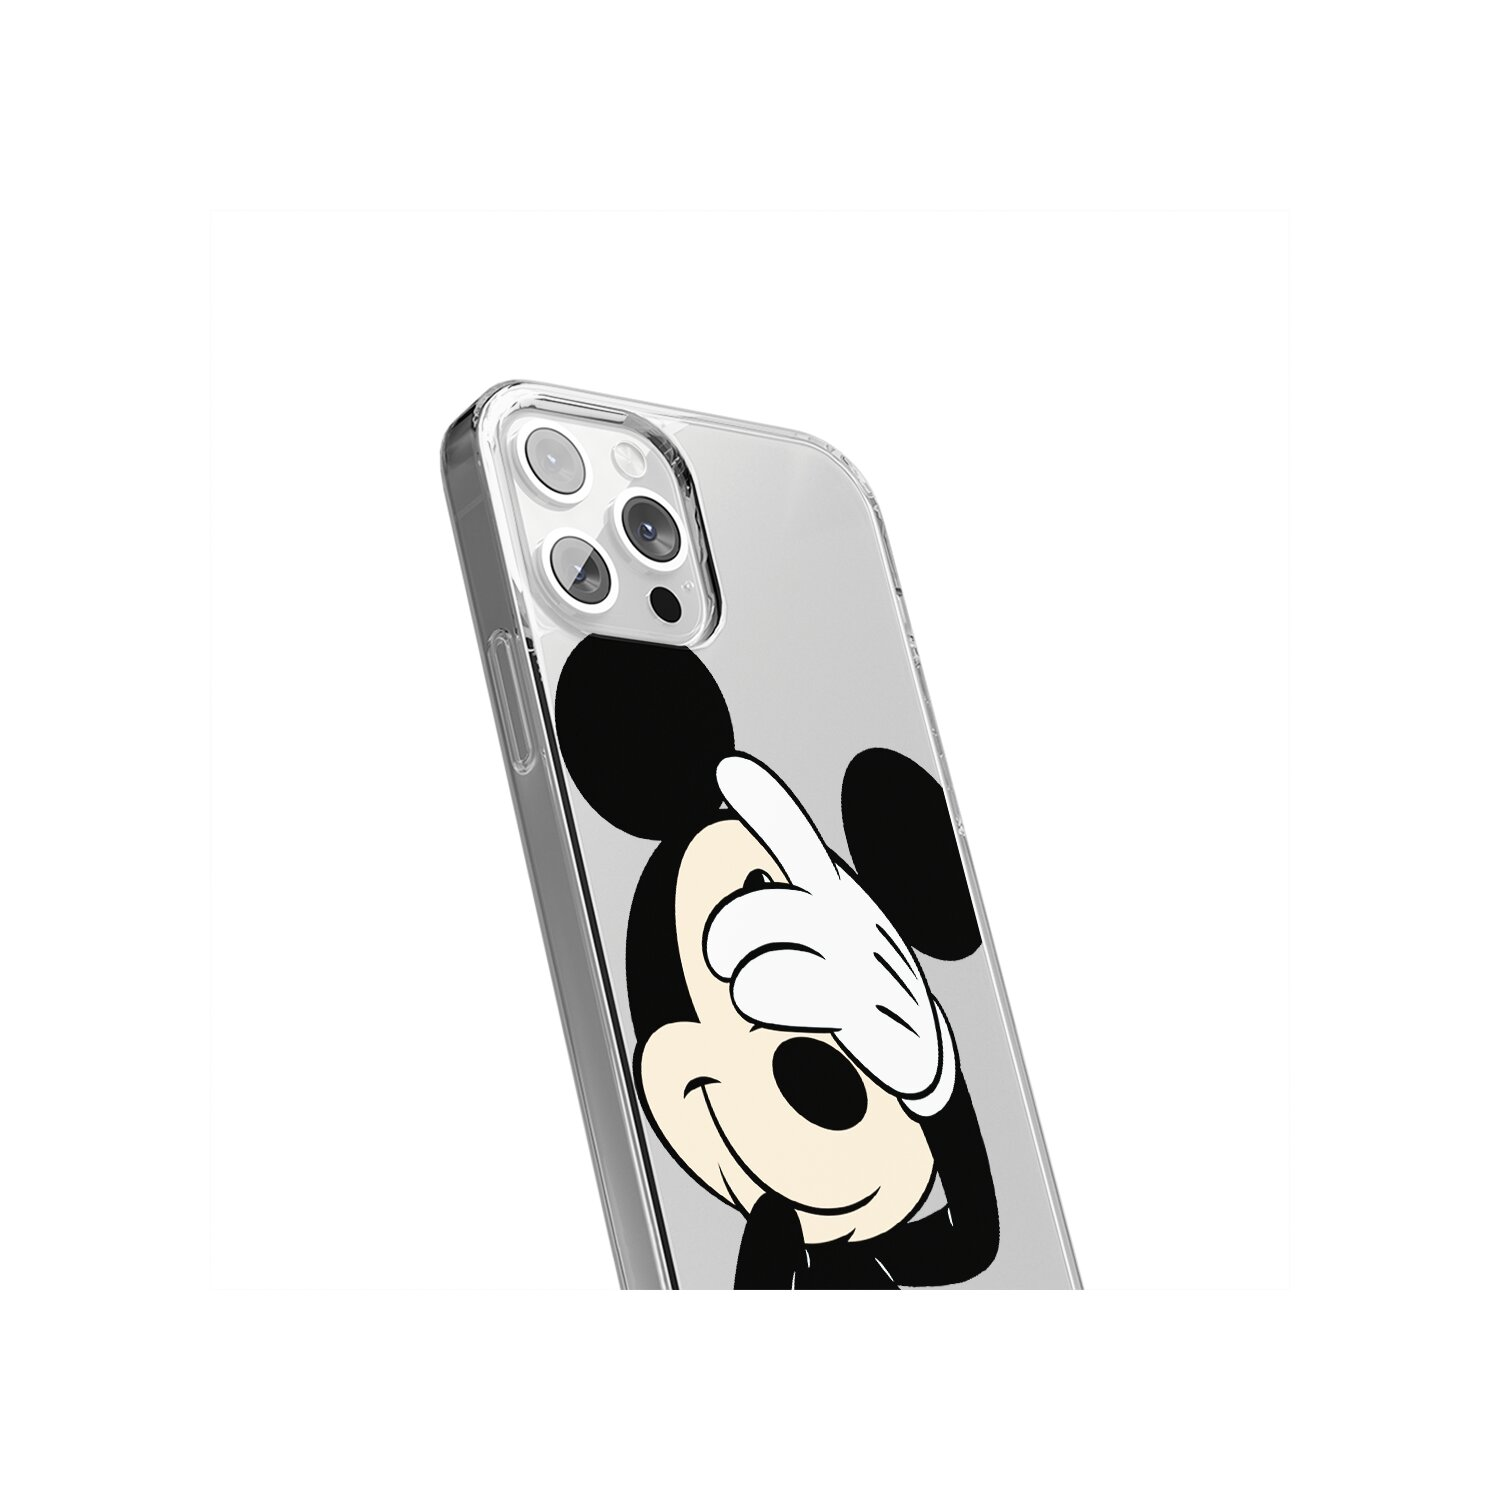 Mickey Backcover, Pro, 003 15 Partial Apple, Print, Transparent iPhone DISNEY